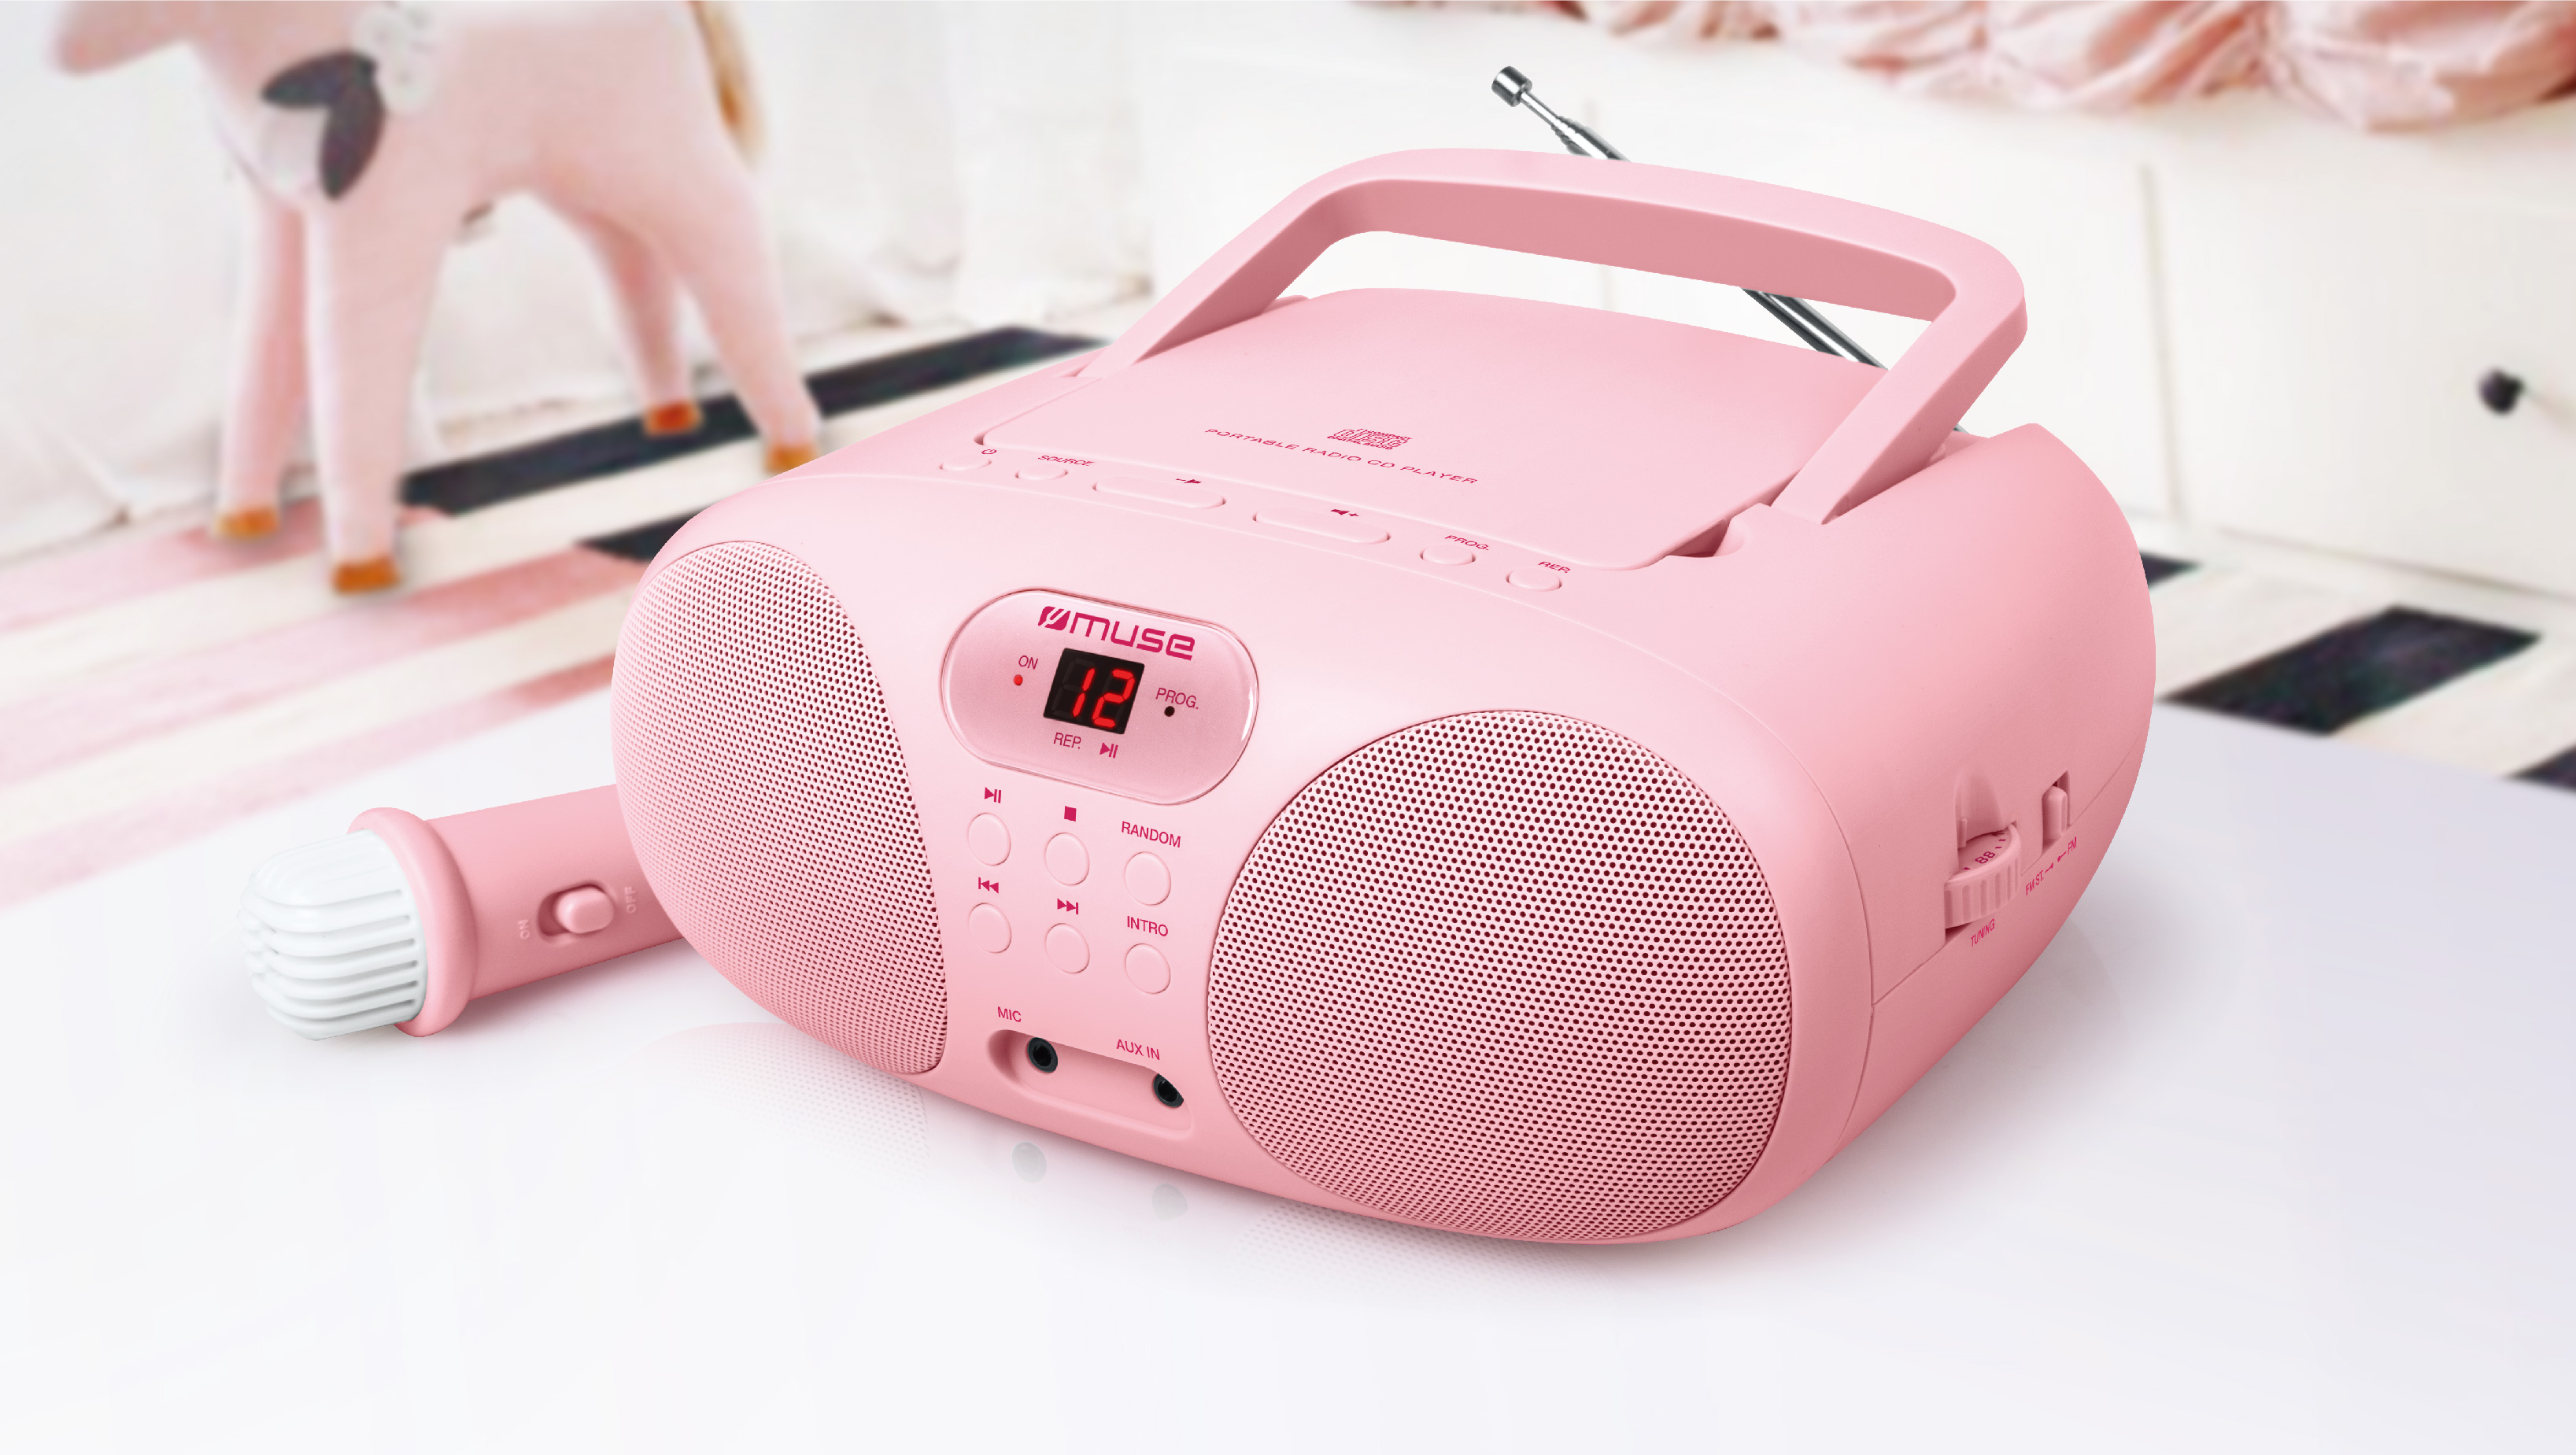 Boombox, MD-203 rosa MUSE KP